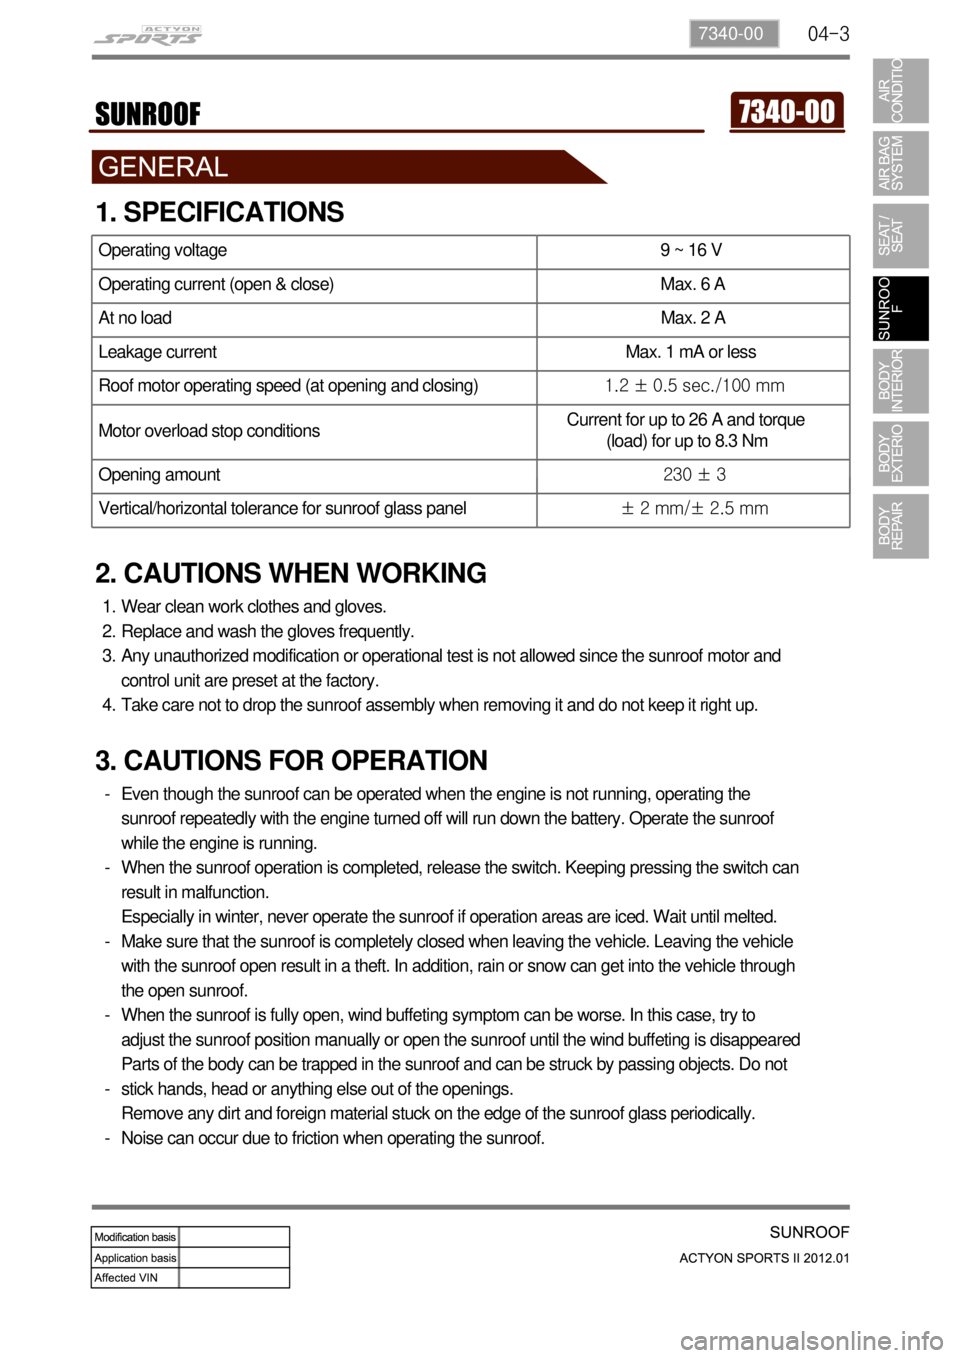 SSANGYONG NEW ACTYON SPORTS 2012  Service Manual 04-37340-00
1. SPECIFICATIONS
2. CAUTIONS WHEN WORKING
Wear clean work clothes and gloves.
Replace and wash the gloves frequently.
Any unauthorized modification or operational test is not allowed sinc